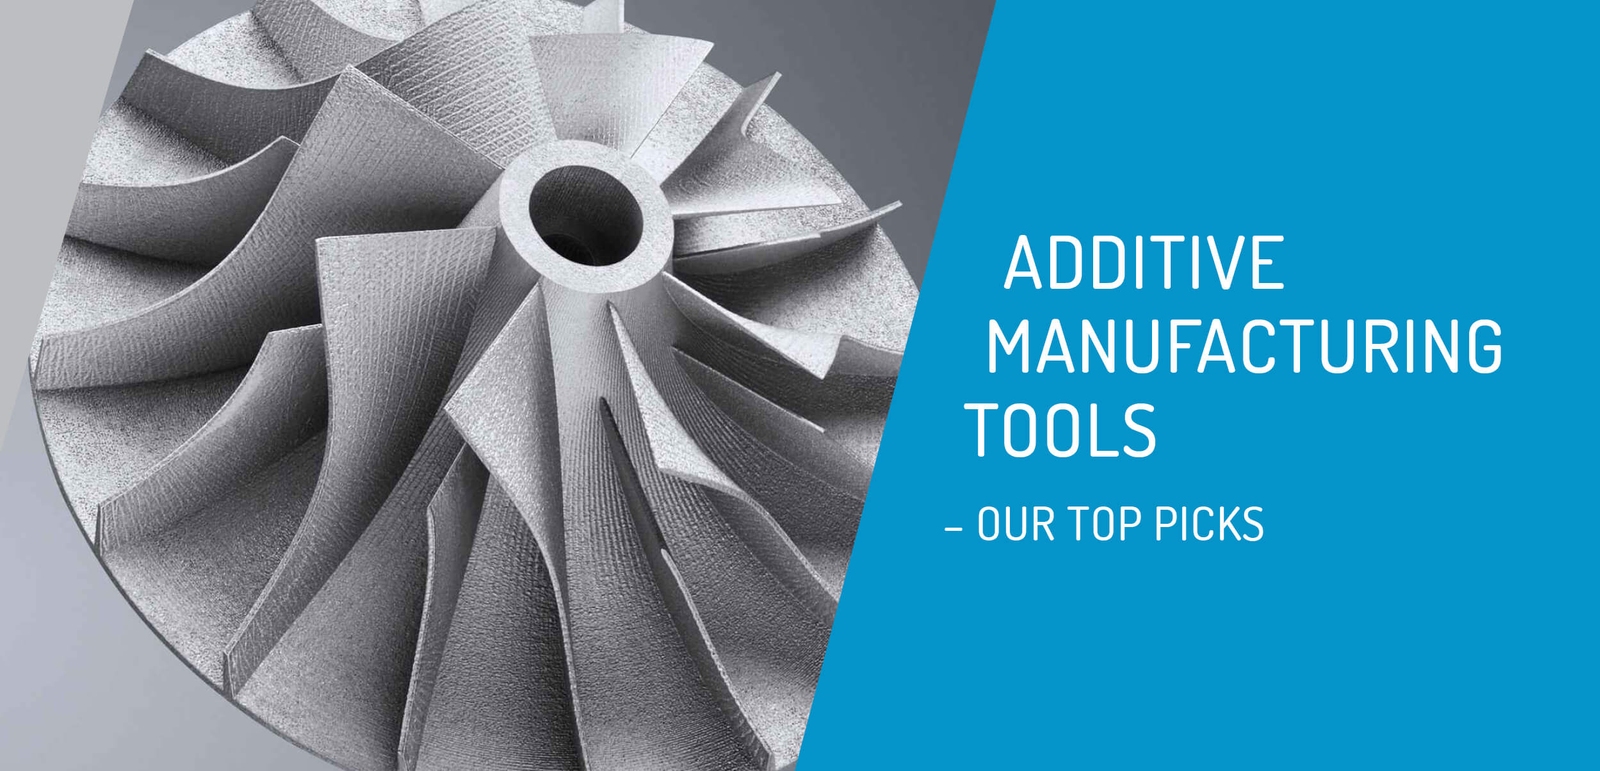 Additive Manufacturing Tools: Our Top Picks